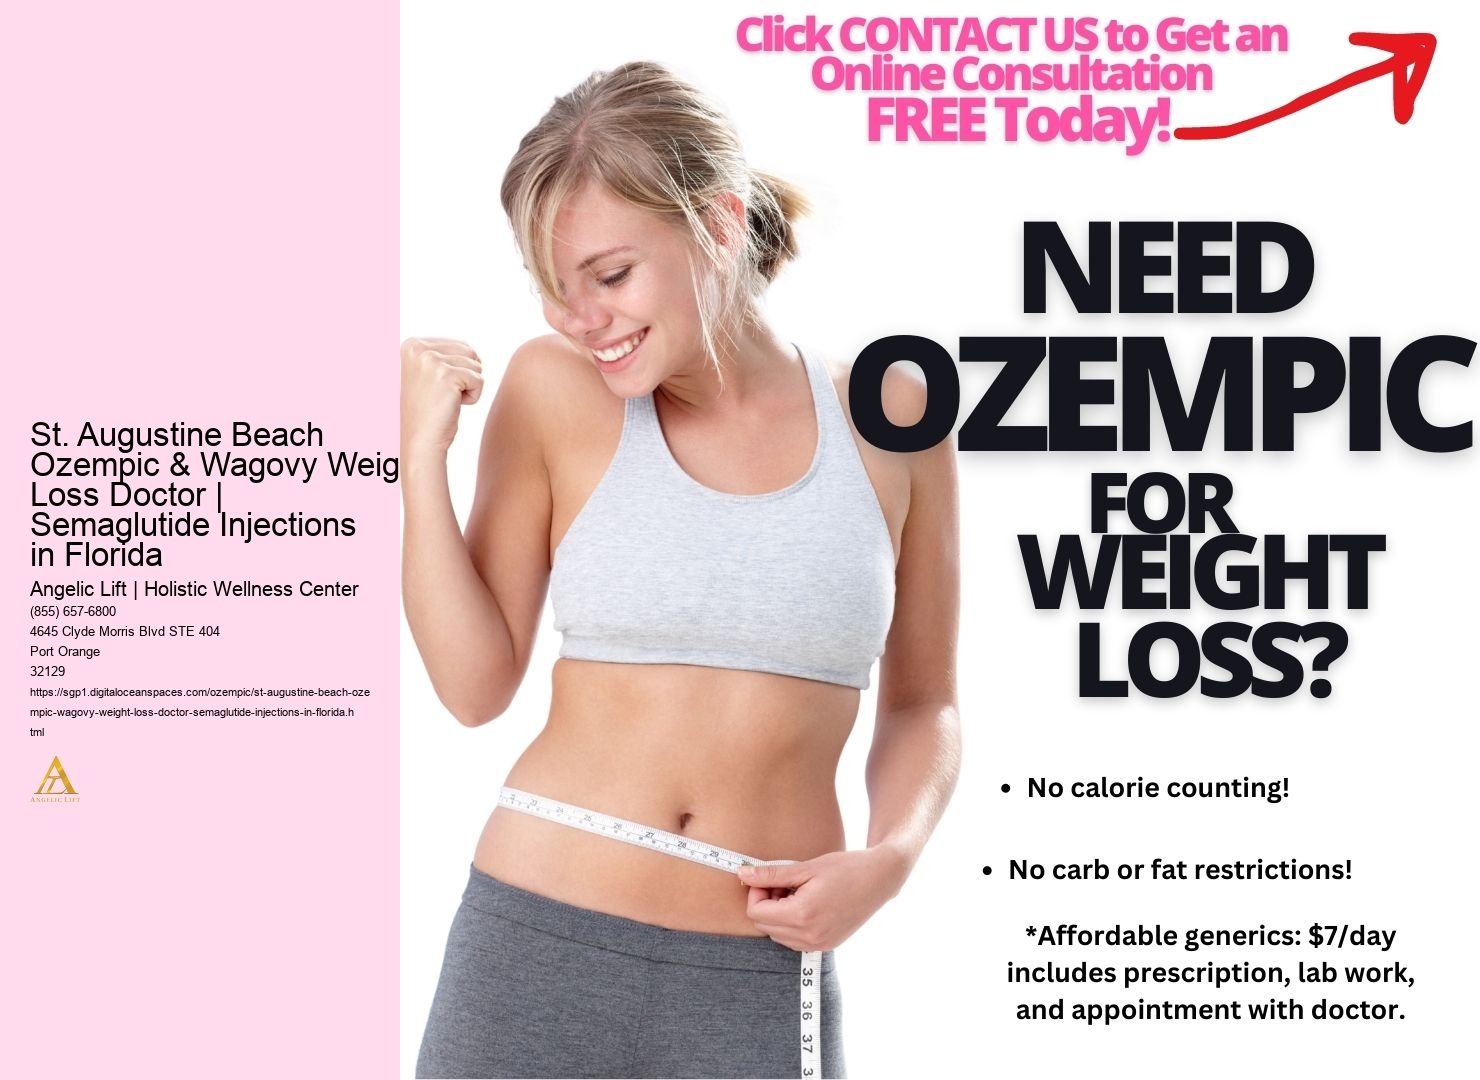 St. Augustine Beach Ozempic & Wagovy Weight Loss Doctor | Semaglutide Injections in Florida